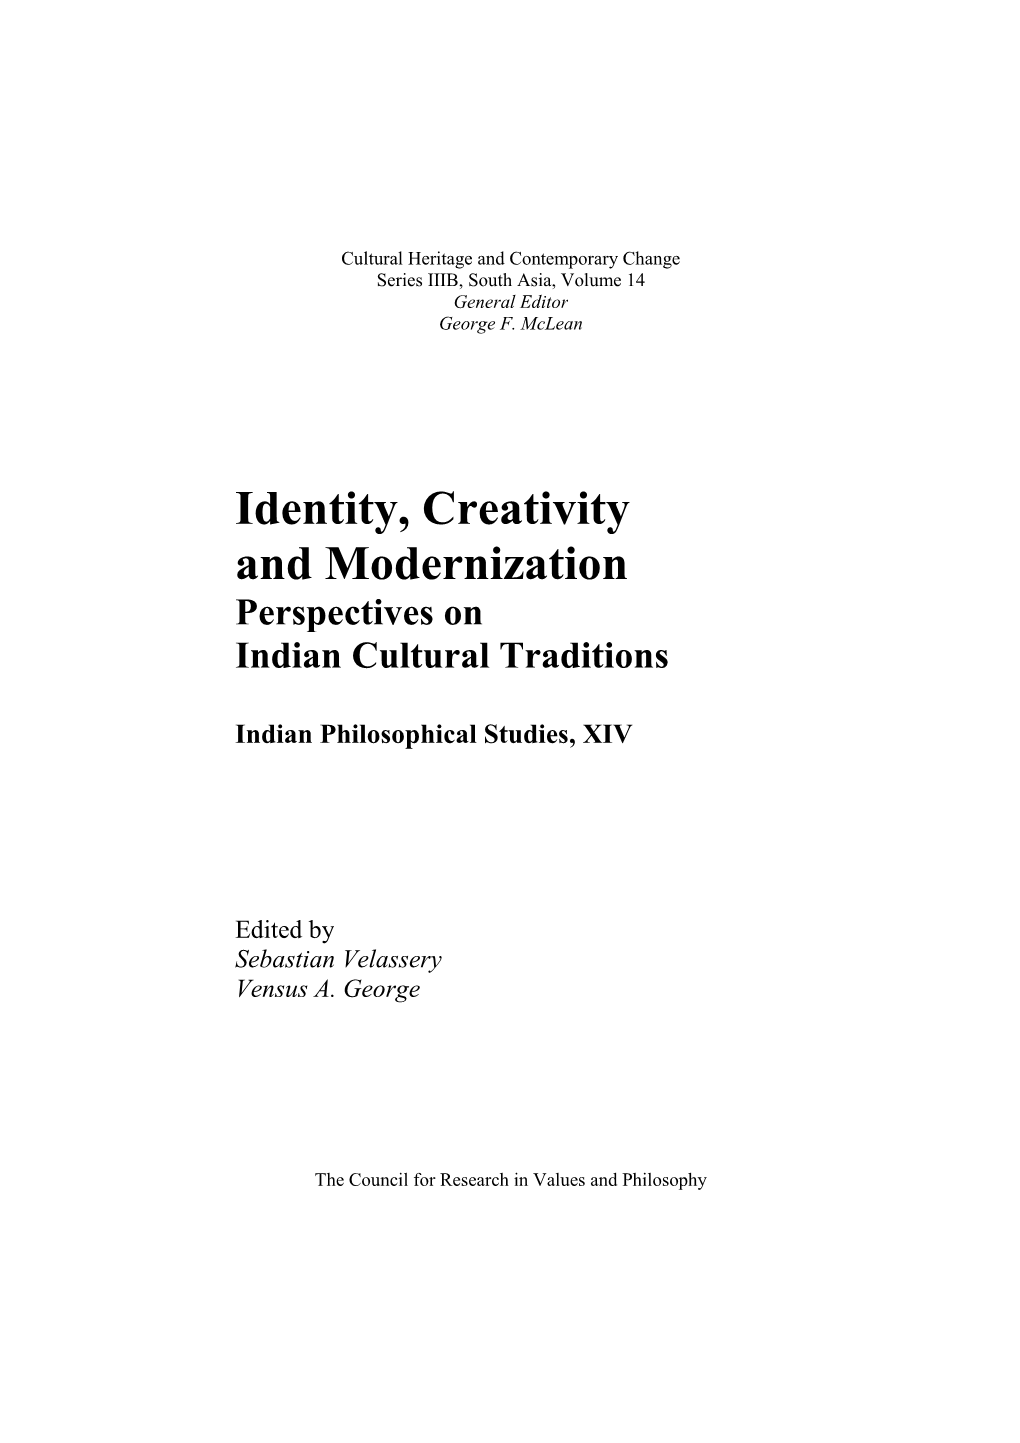 Identity, Creativity and Modernization Perspectives on Indian Cultural Traditions